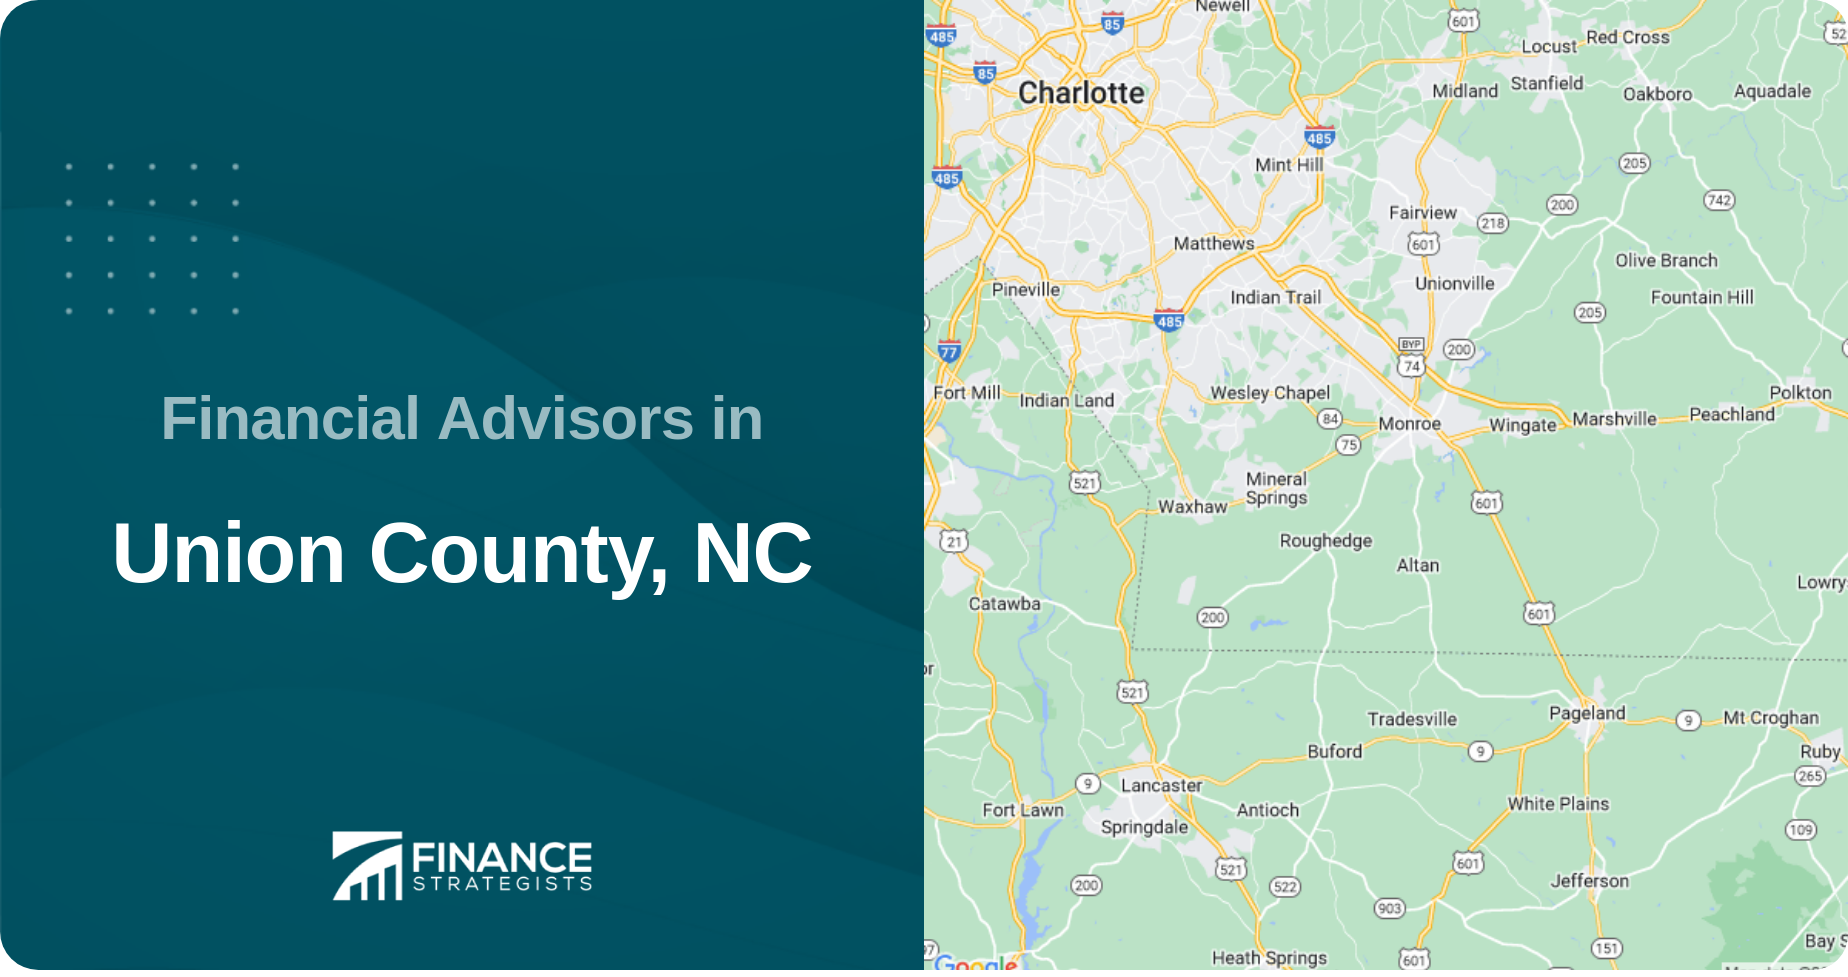 Financial Advisors in Union County, NC